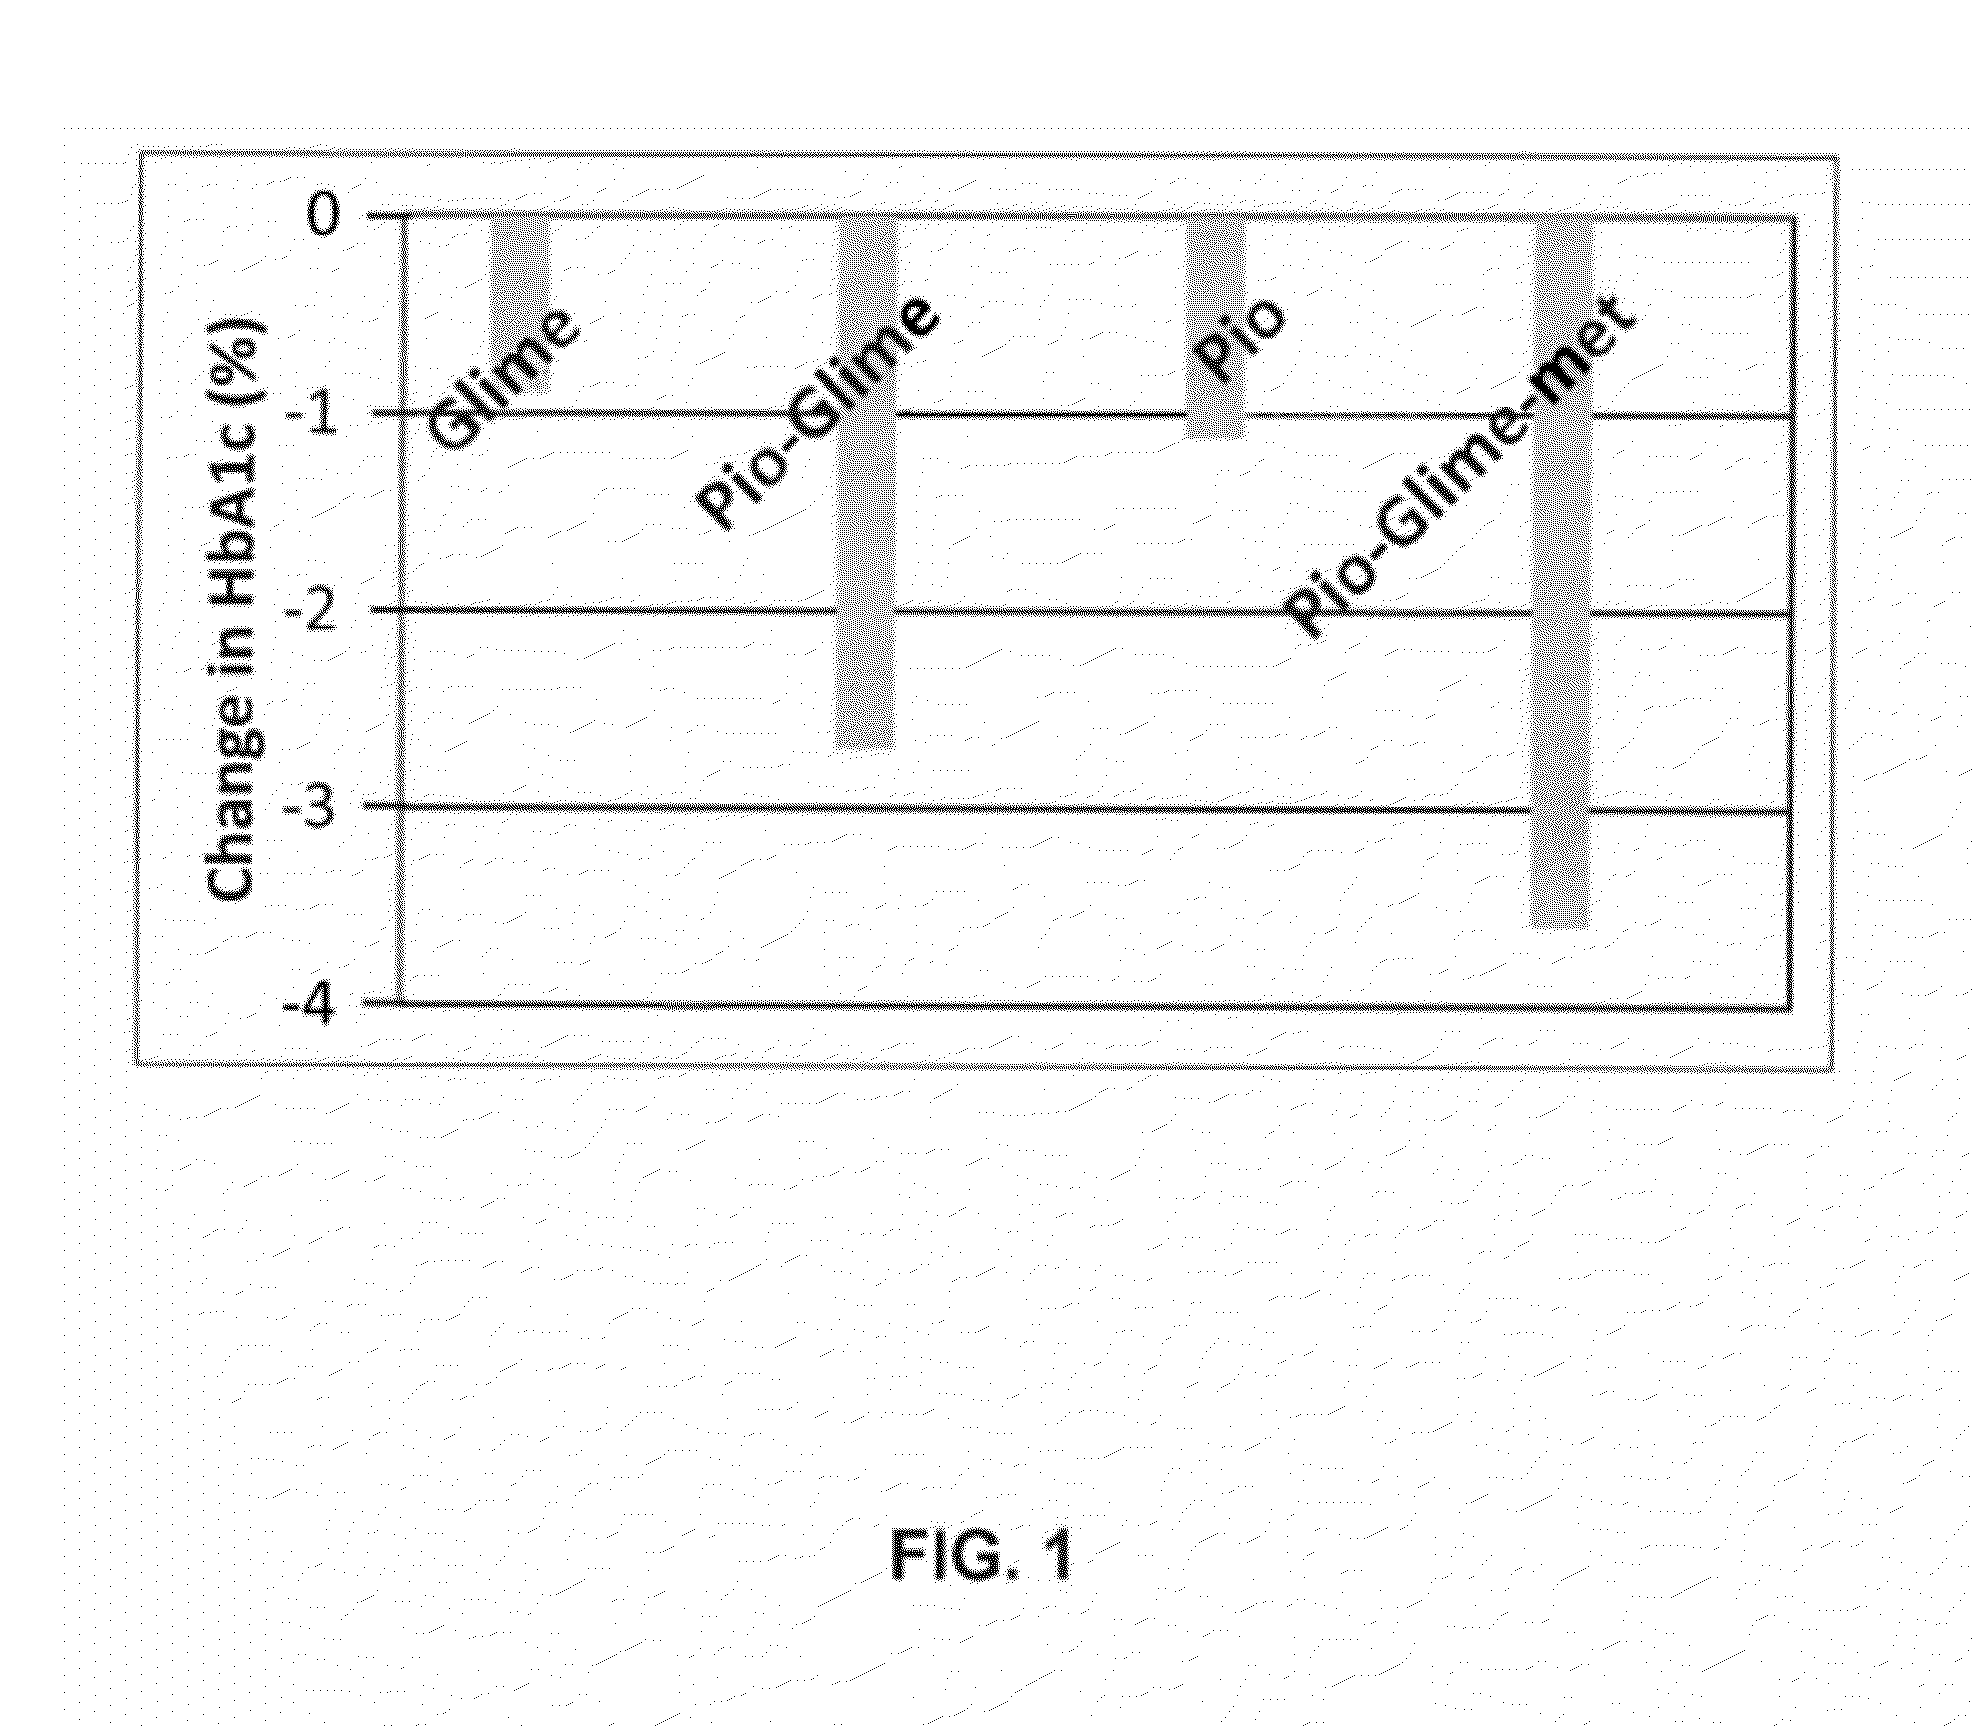 Compositions and Methods for Treating Type II Diabetes and Related Disorders